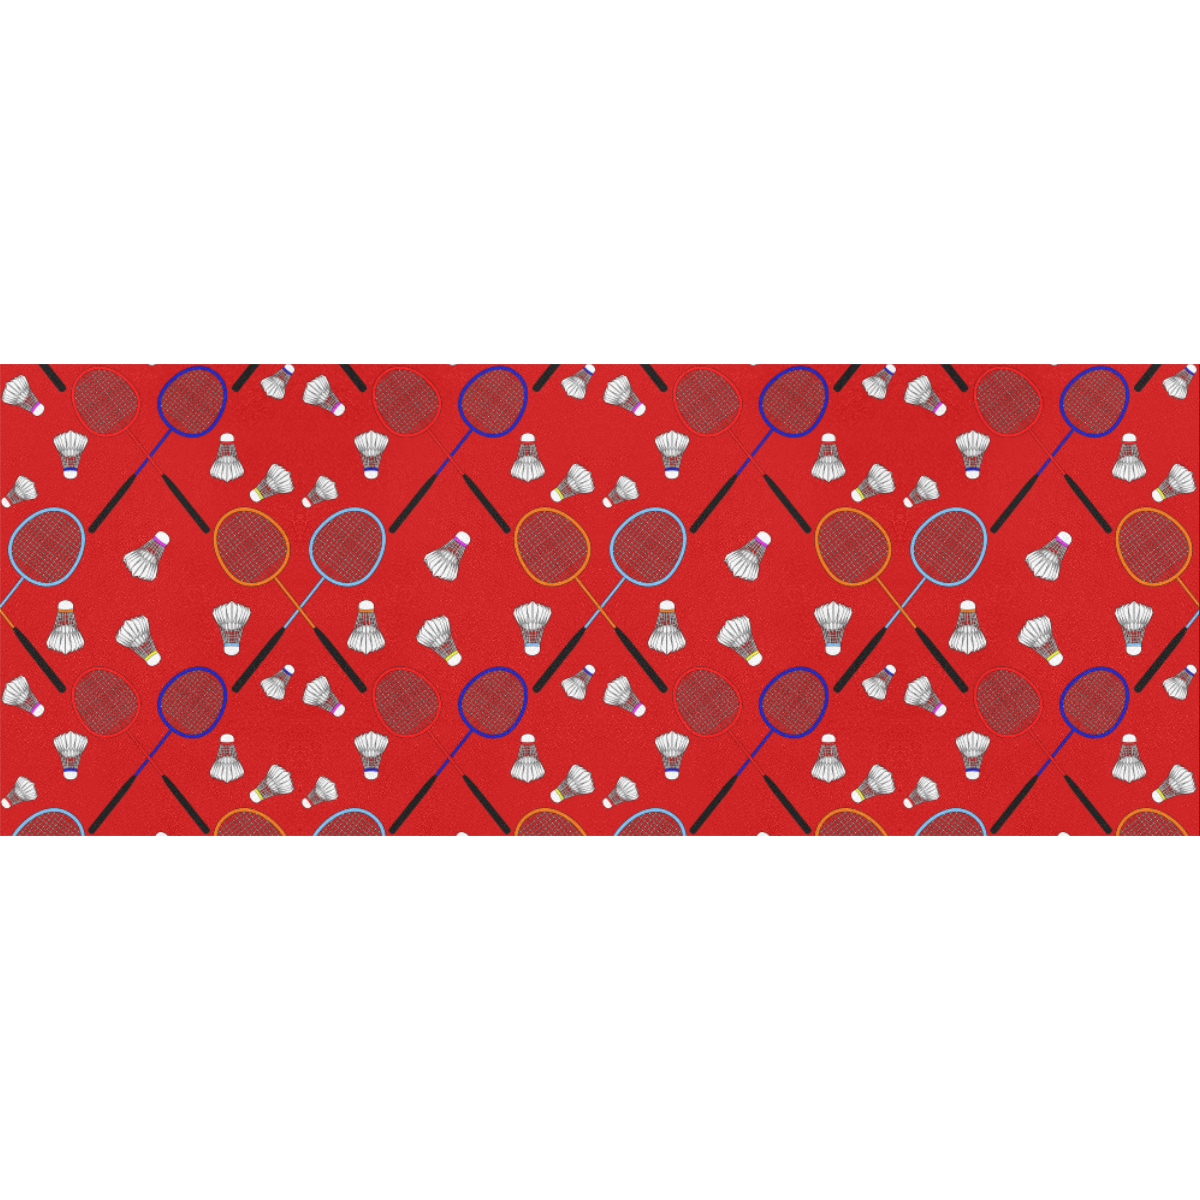 Badminton Rackets and Shuttlecocks Pattern Sports Red Gift Wrapping Paper 58"x 23" (5 Rolls)